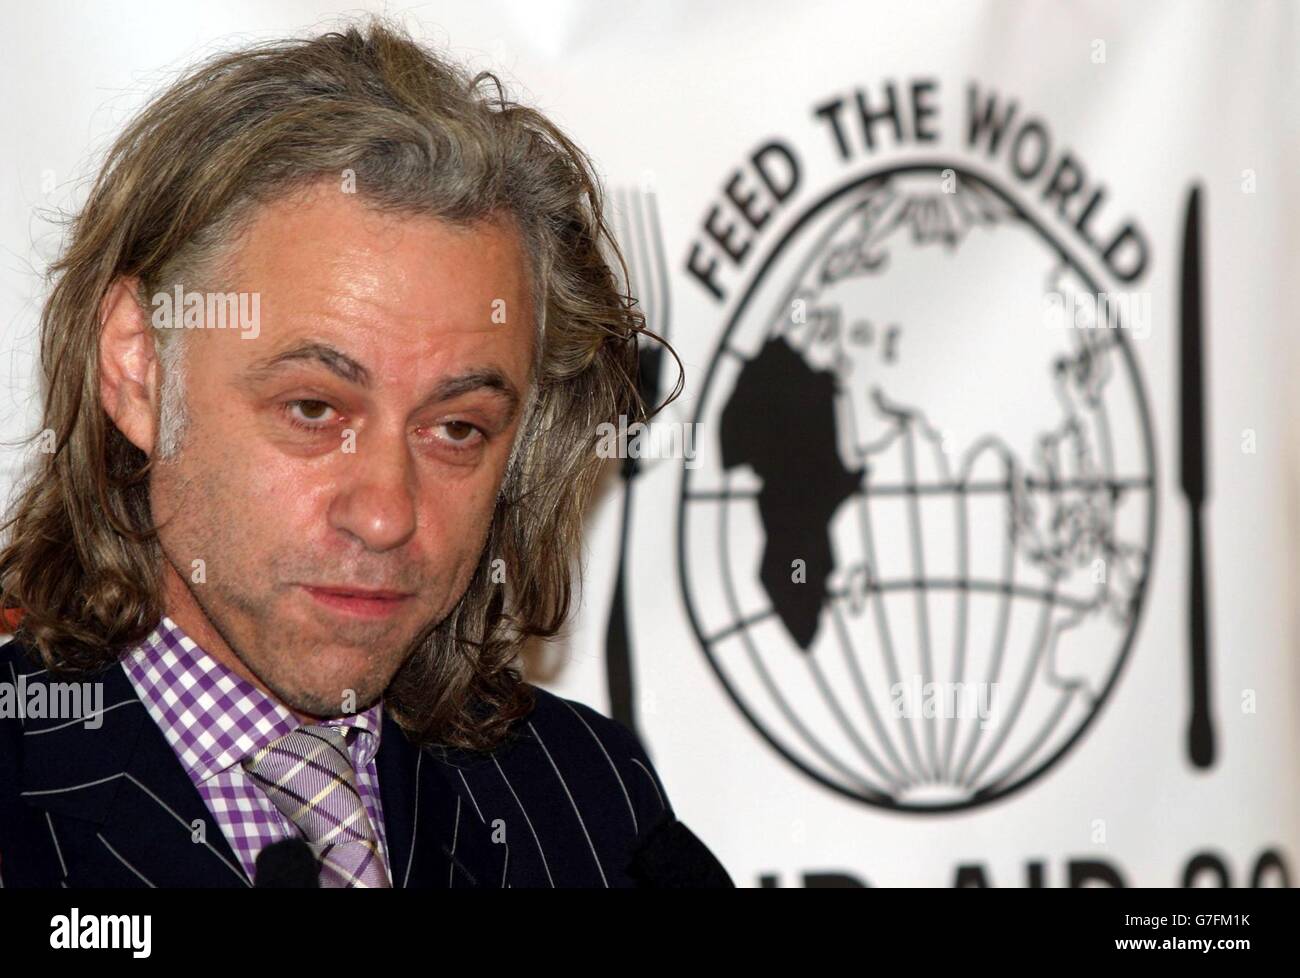 Bob Geldof in New York City to promote the Live Aid DVD. His appearance followed the broadcast in Britain of the new Band Aid 20 charity single to raise money for Africa. Stock Photo